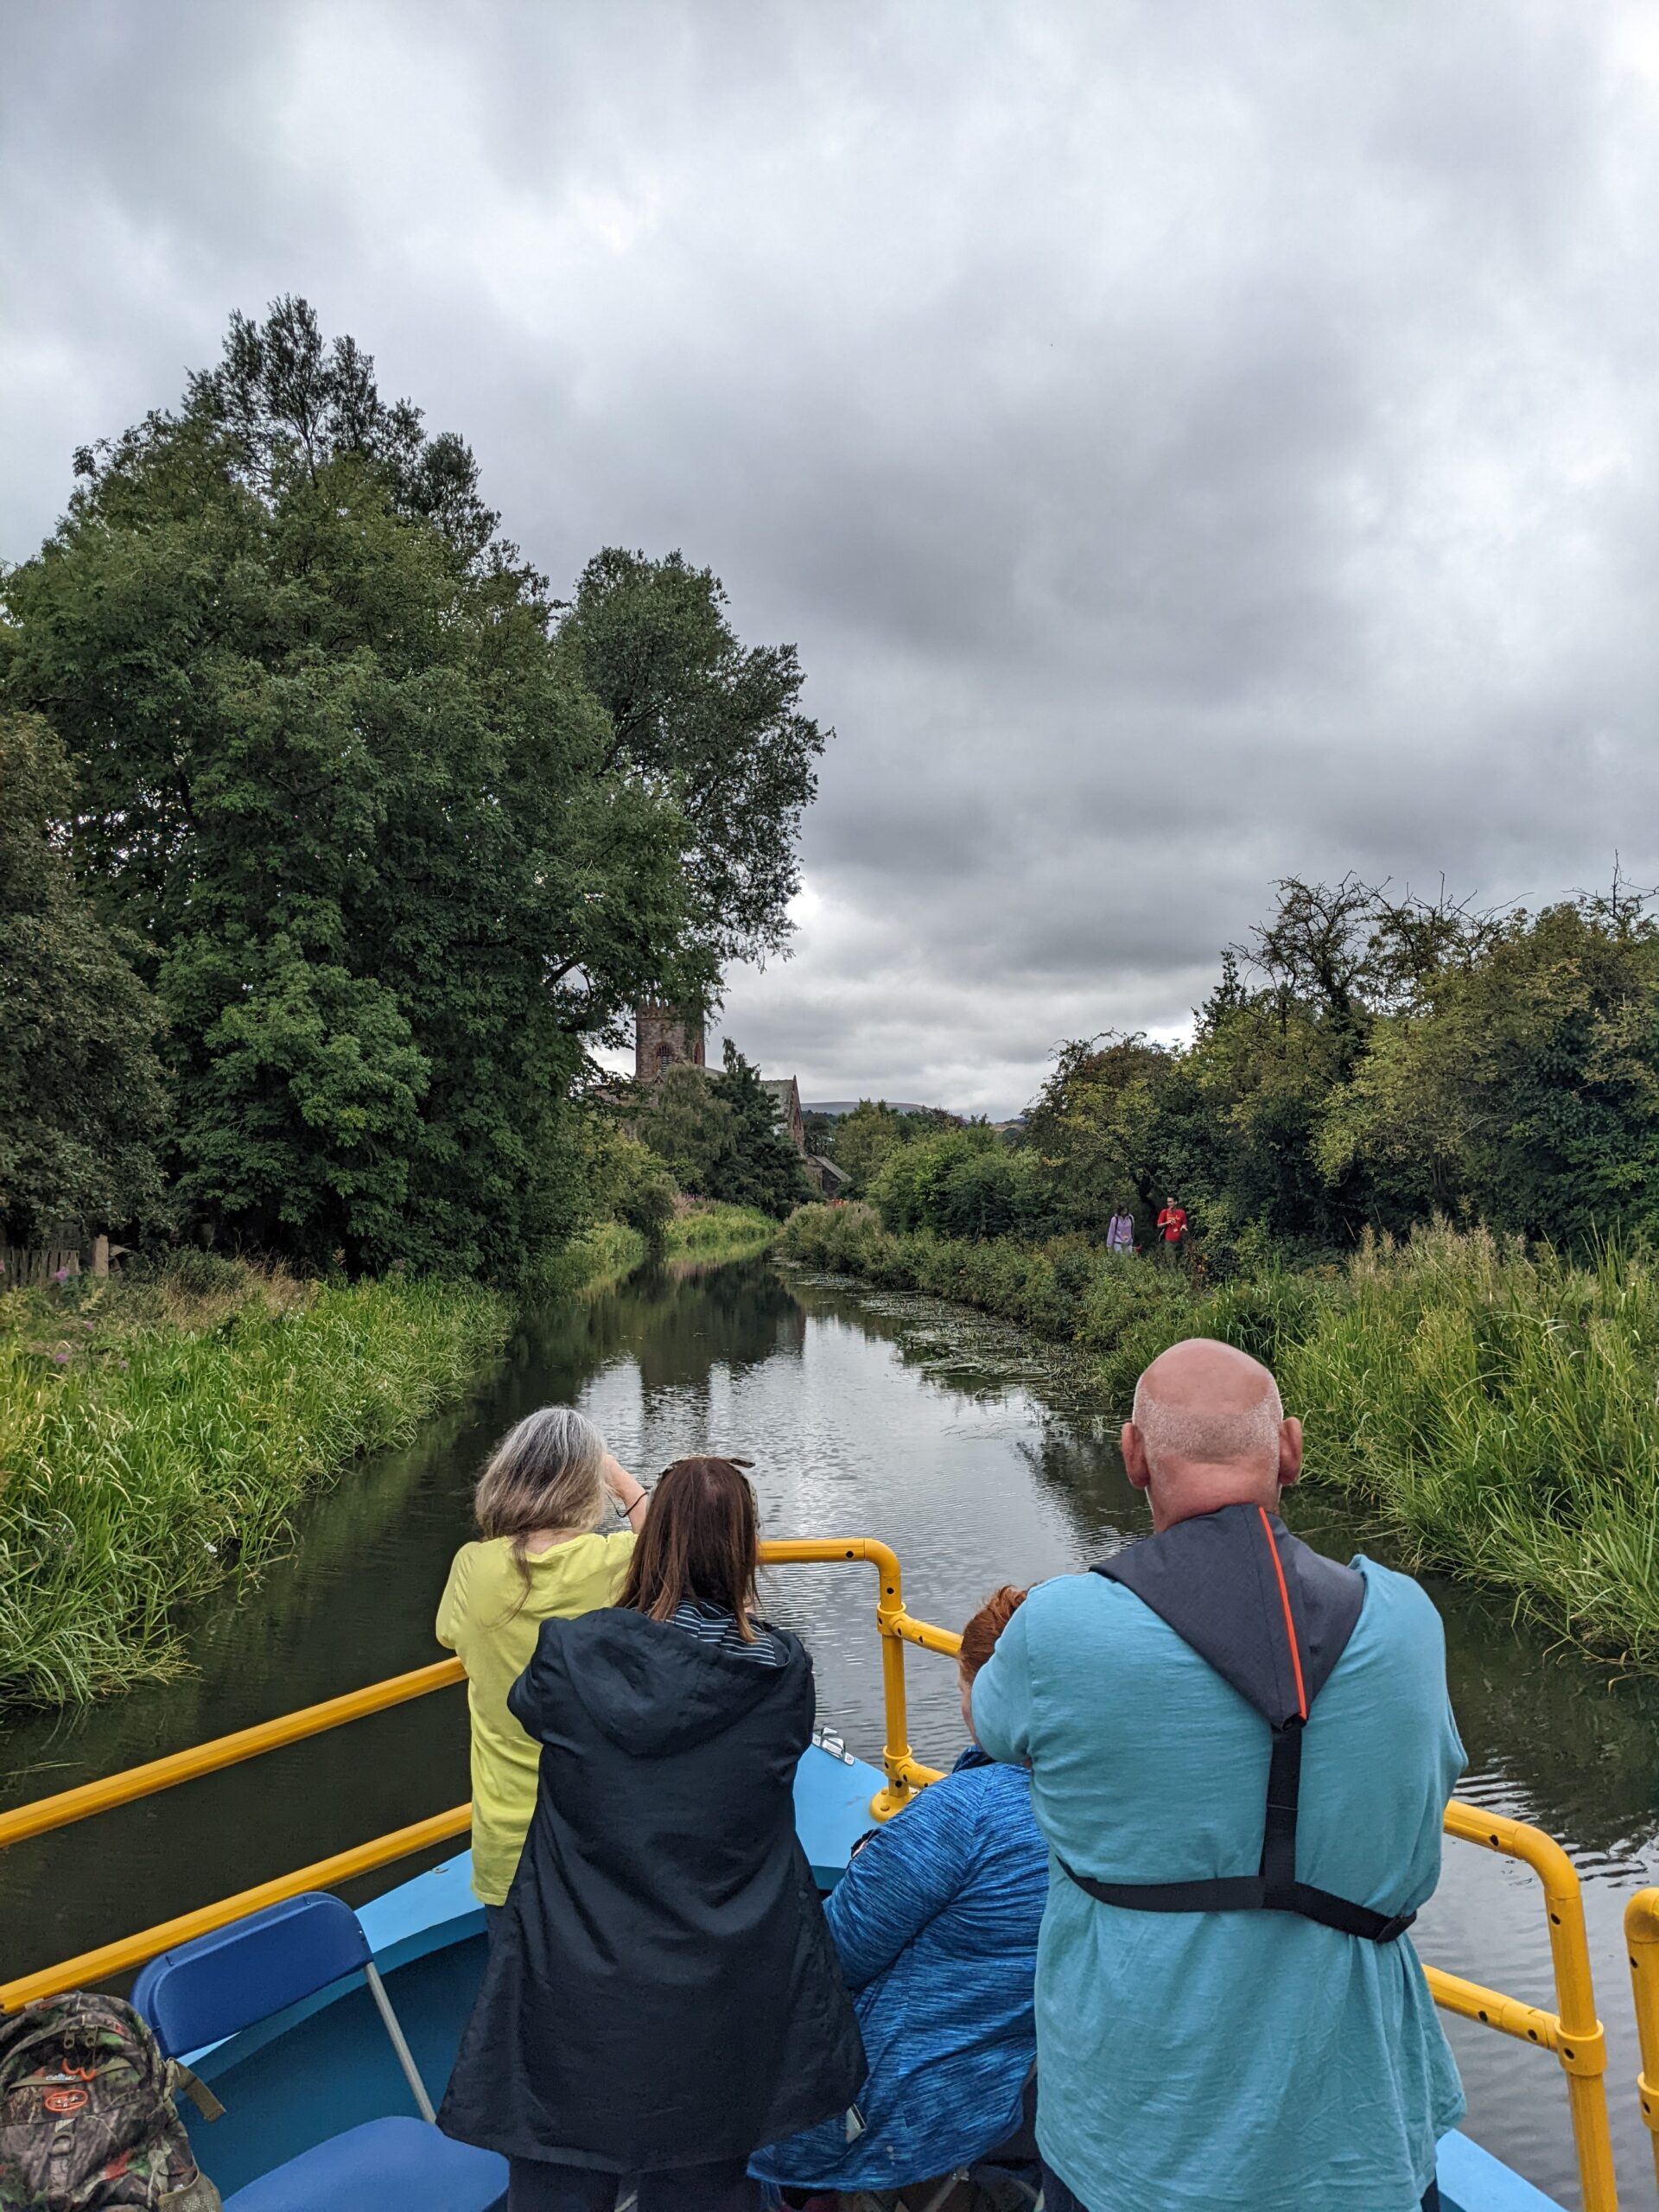 People on a canal boat with a view of the canal, trees and a church